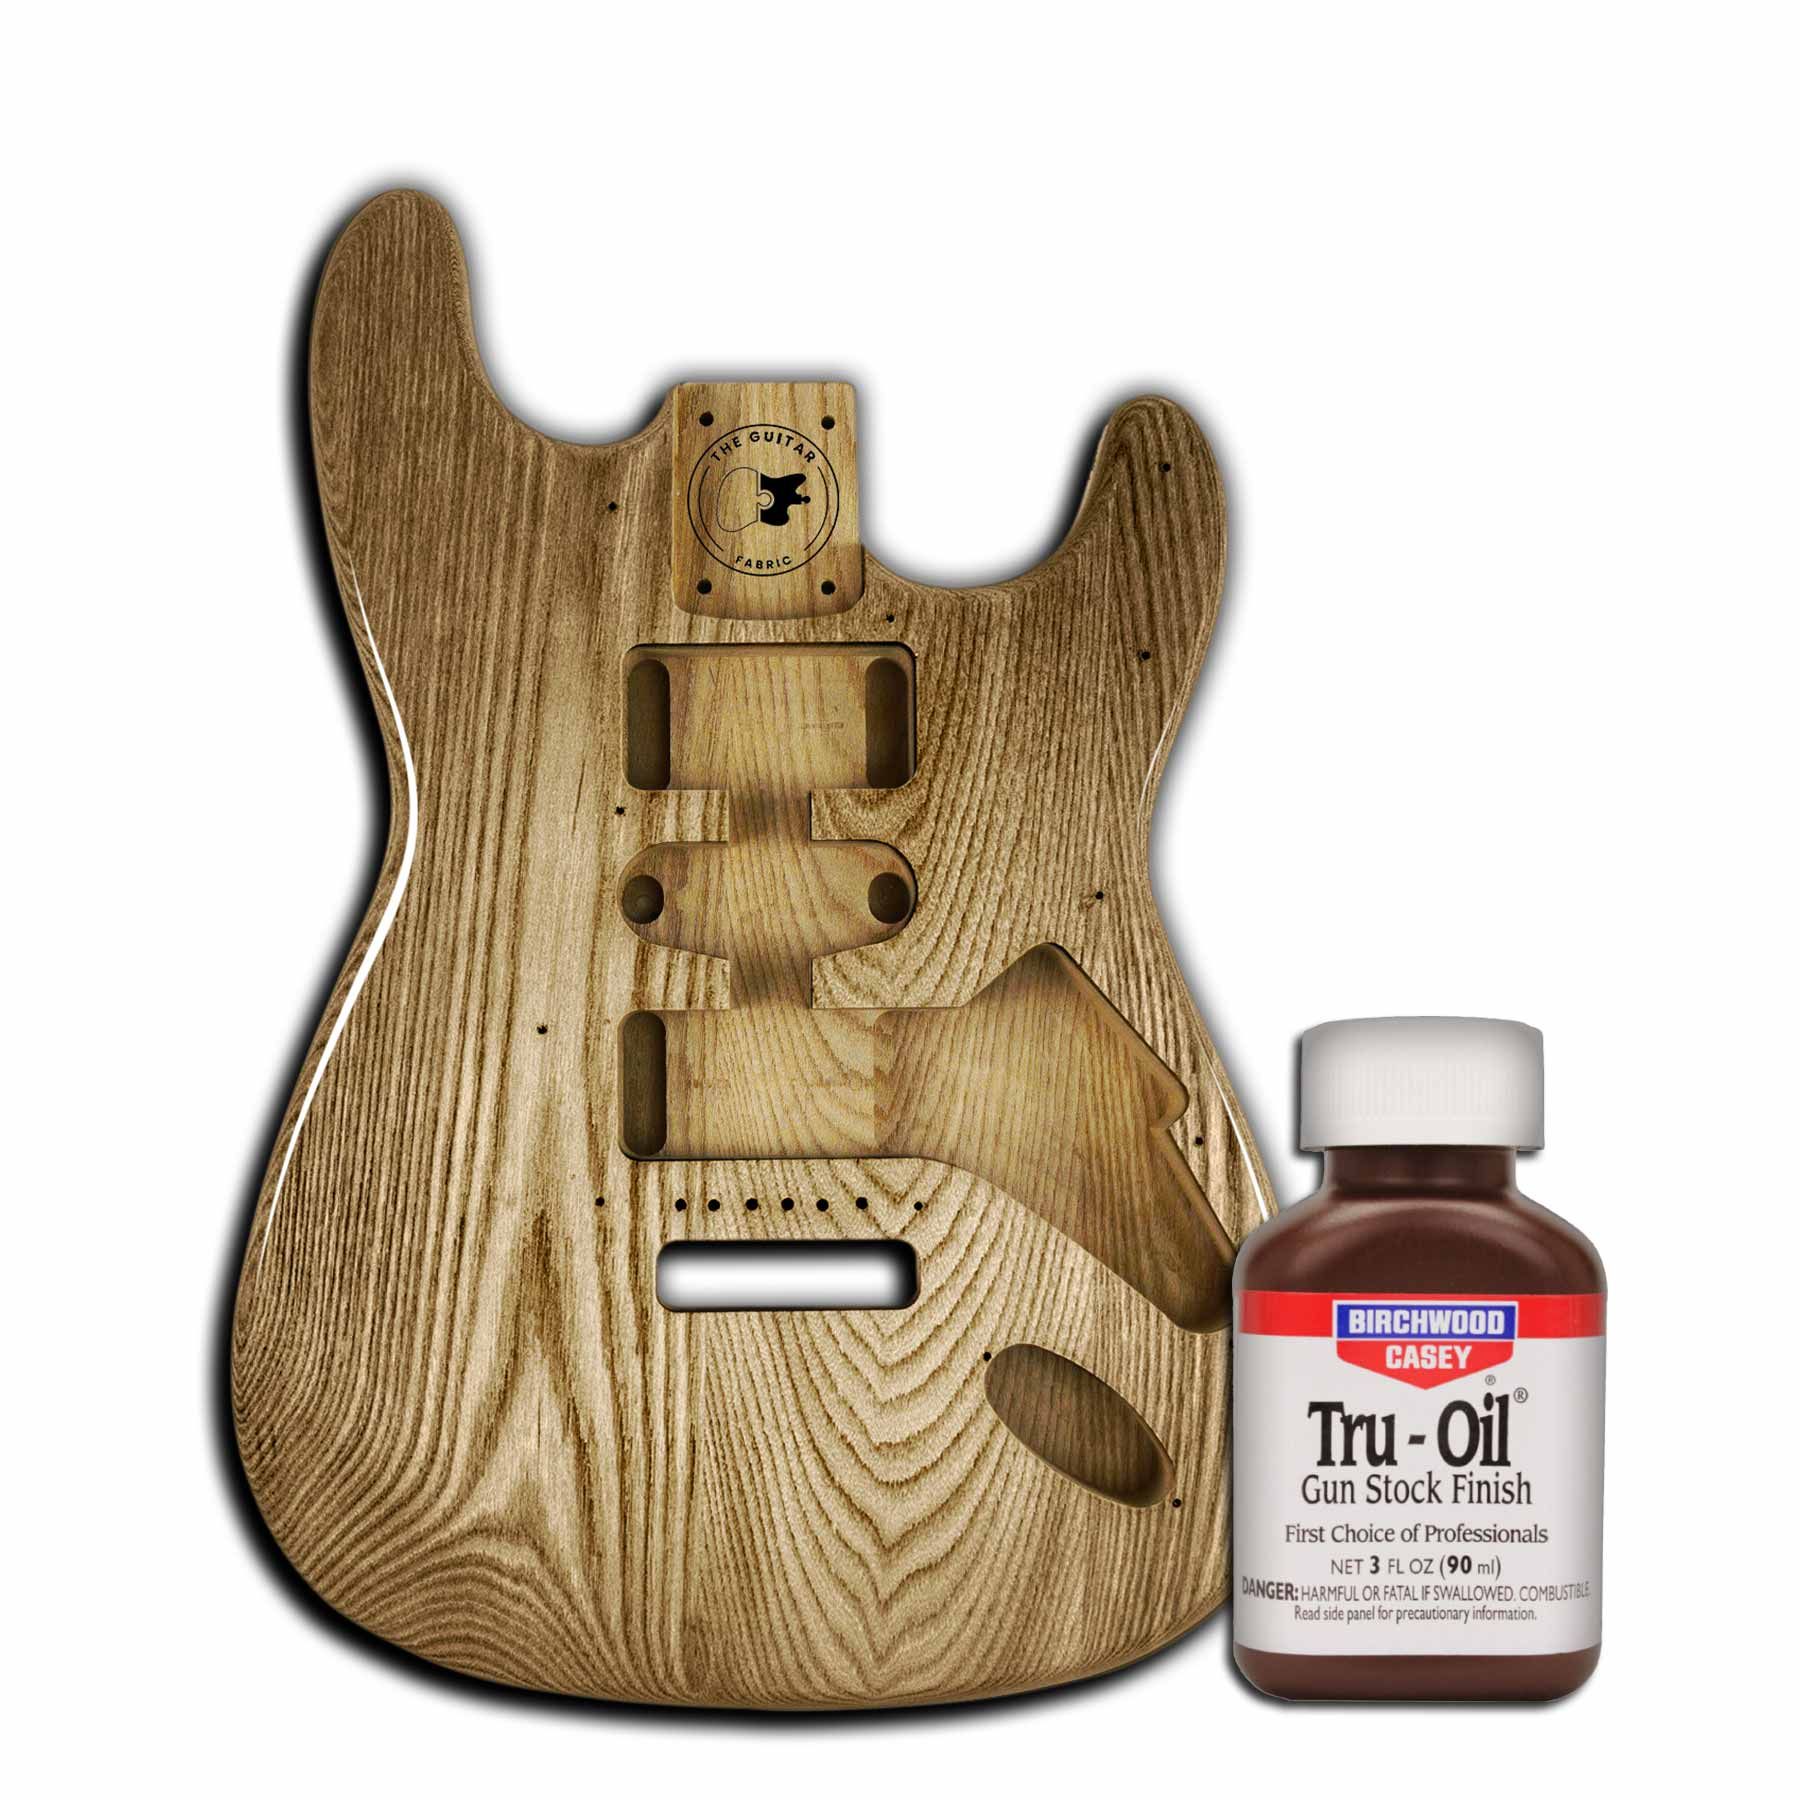 Tru-Oil 90mL (3oz): to Finish and Varnish a Guitar